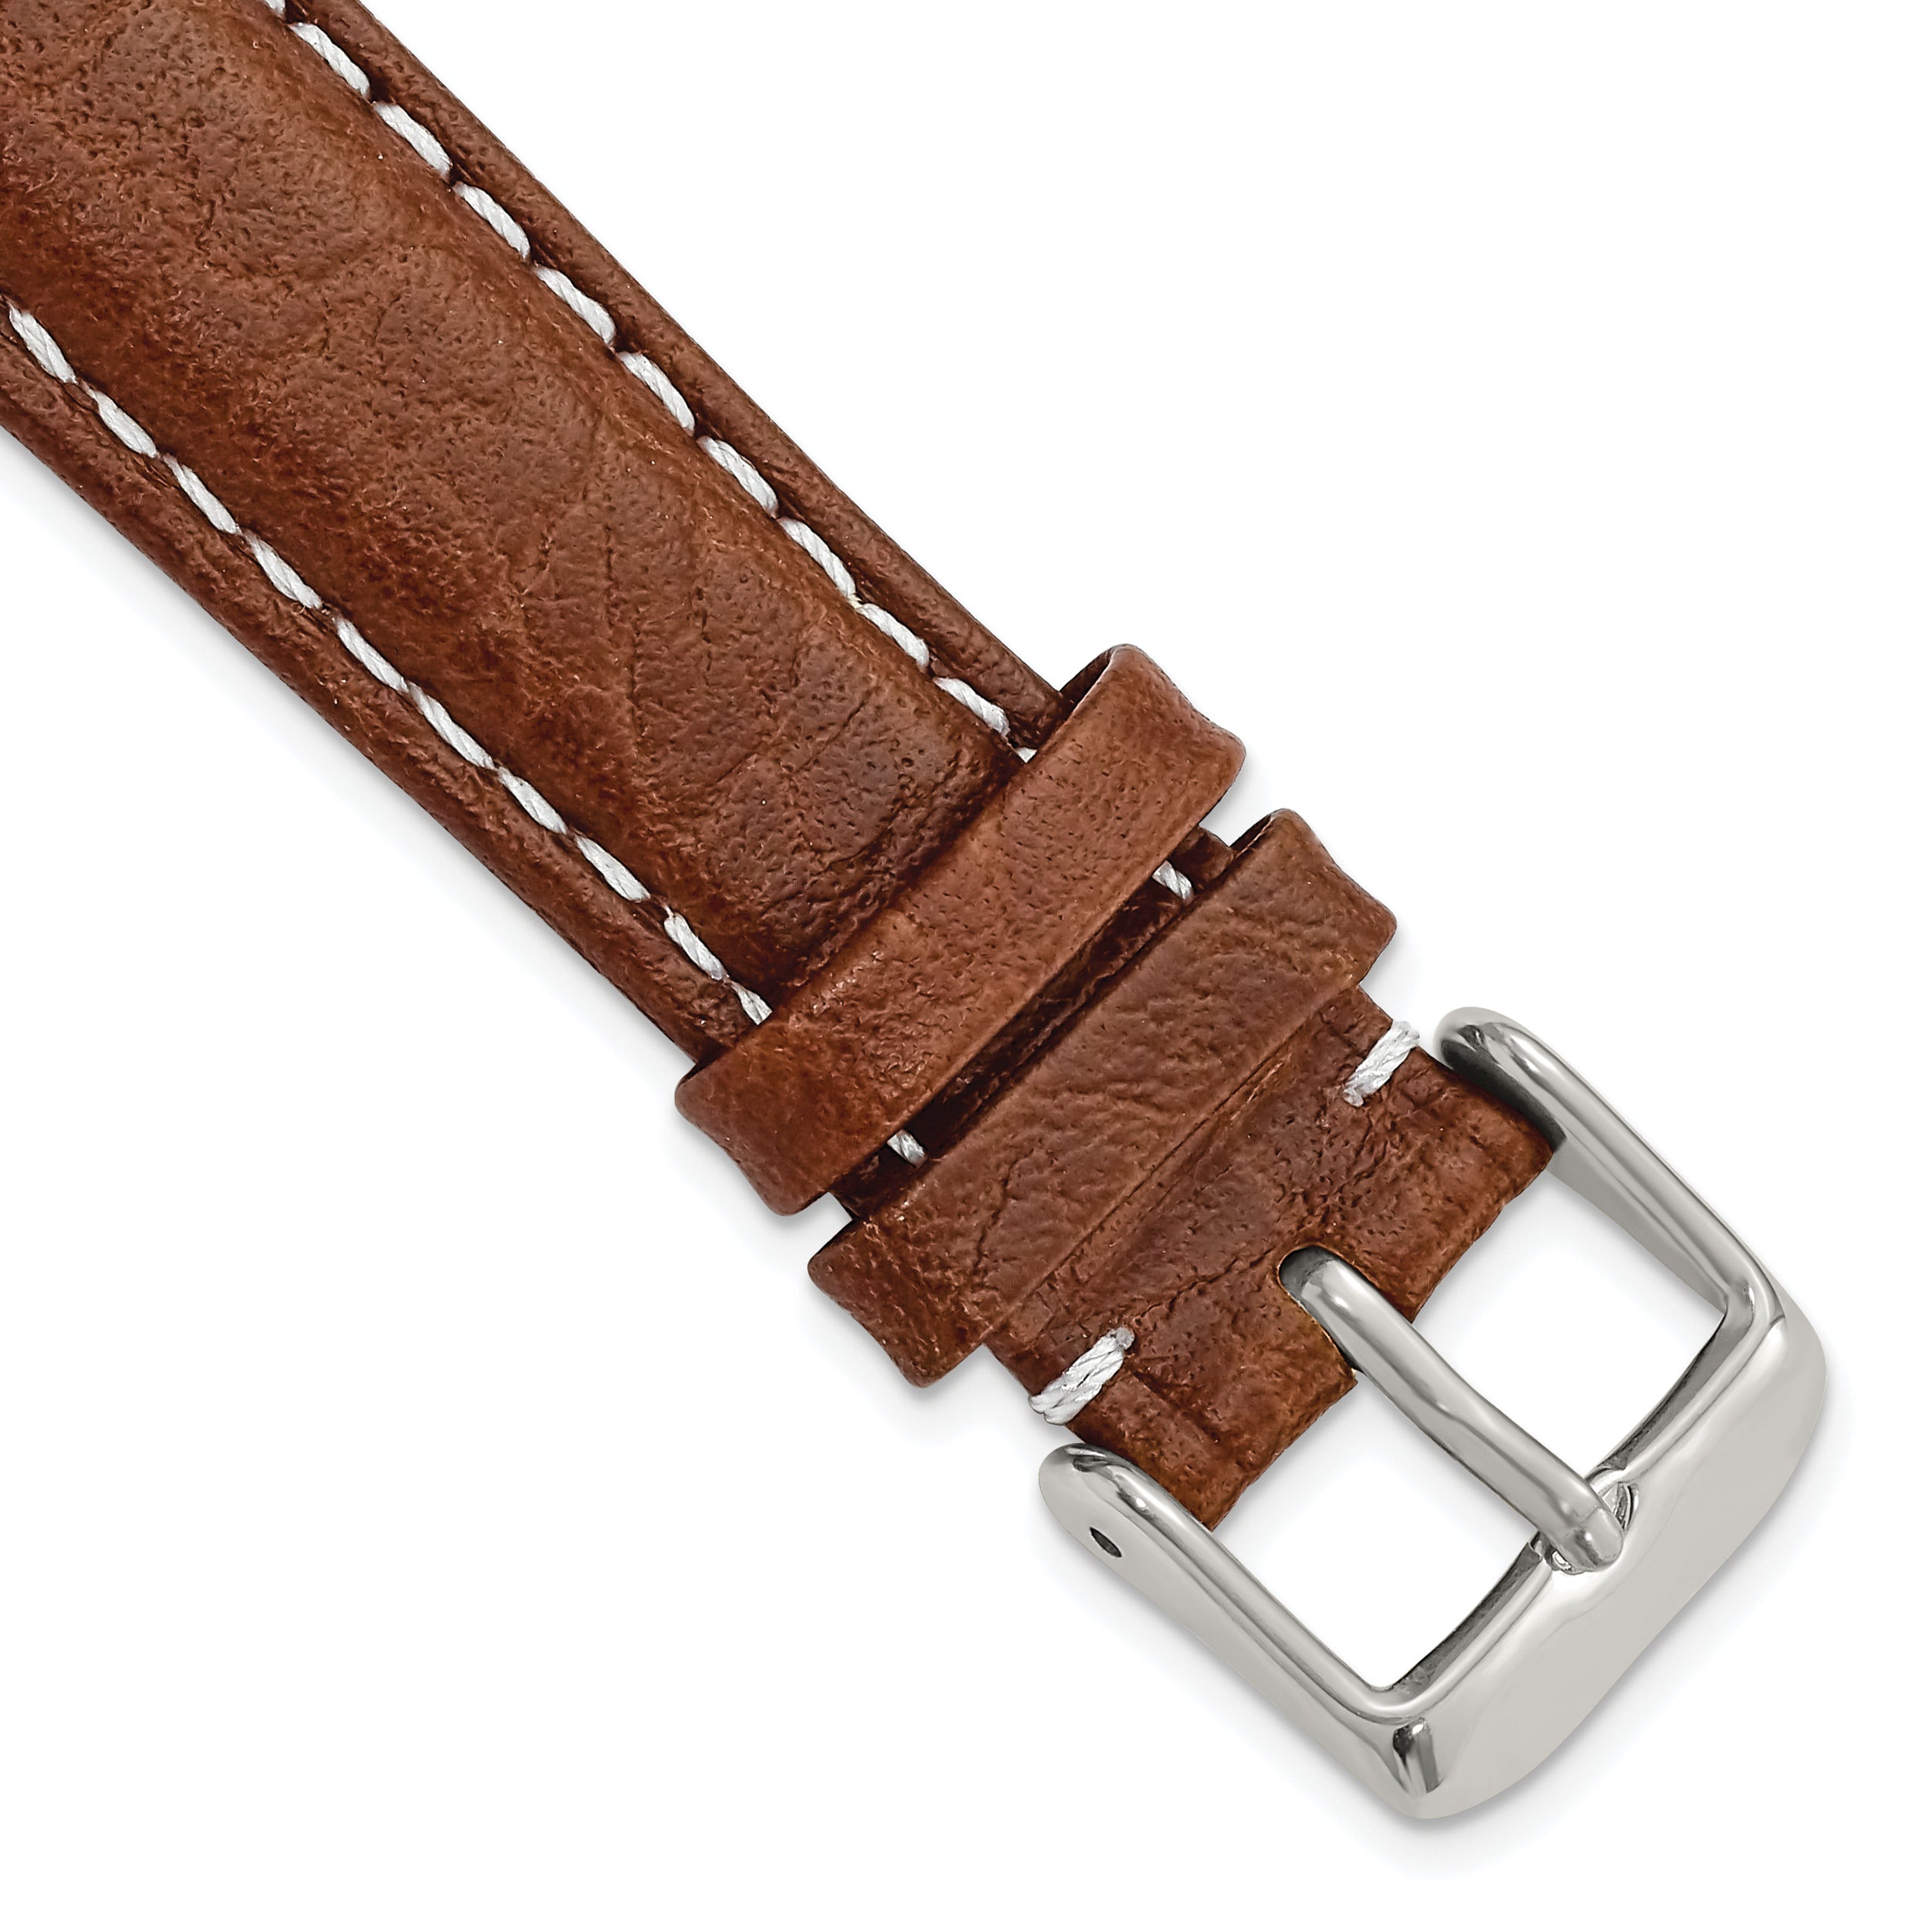 DeBeer 19mm Havana Sport Leather with White Stitching and Silver-tone Buckle 7.5 inch Watch Band